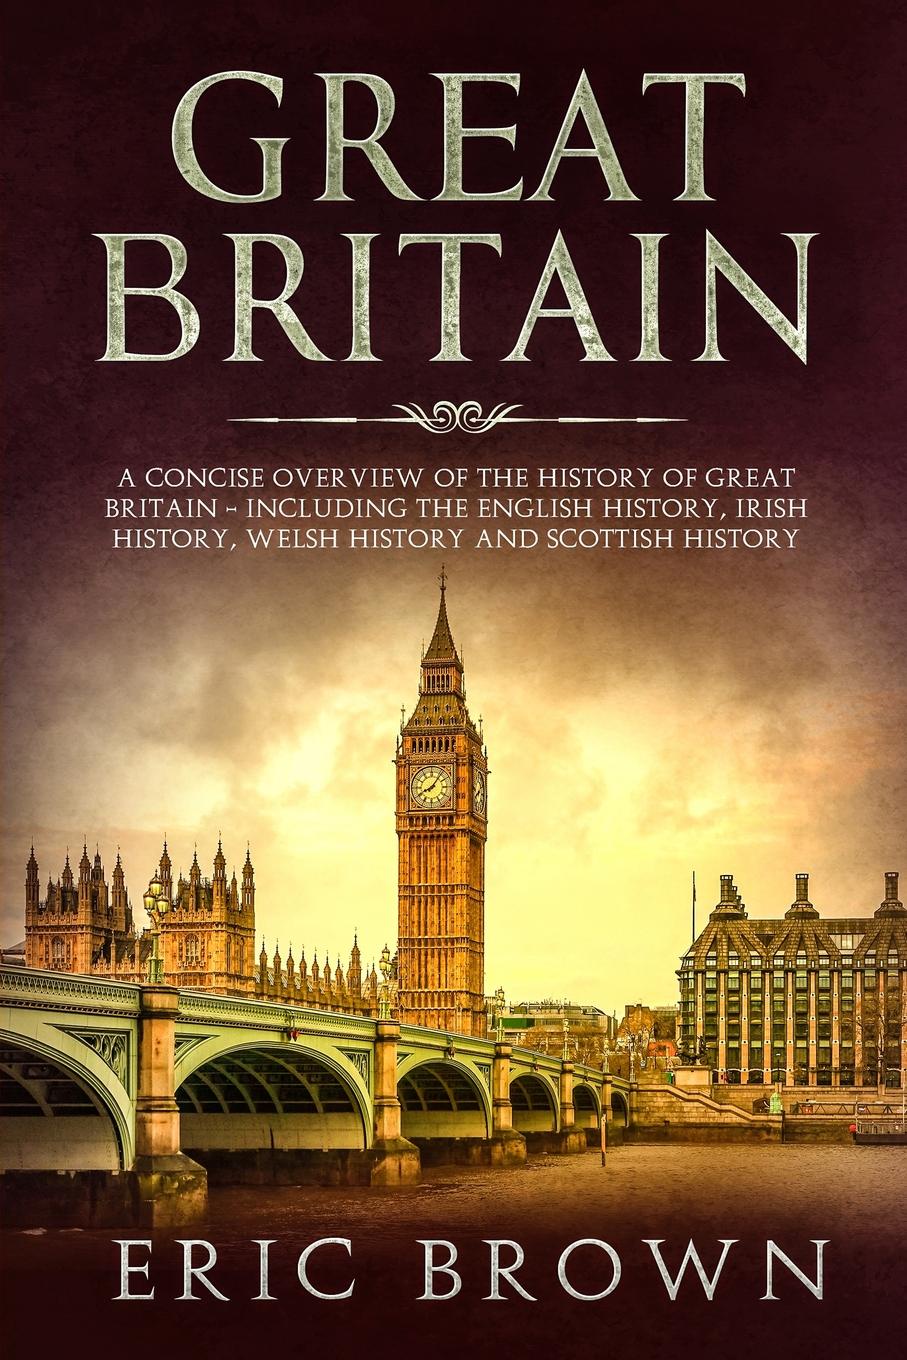 Great Britain. A Concise Overview of The History of Great Britain - Including the English History, Irish History, Welsh History and Scottish History